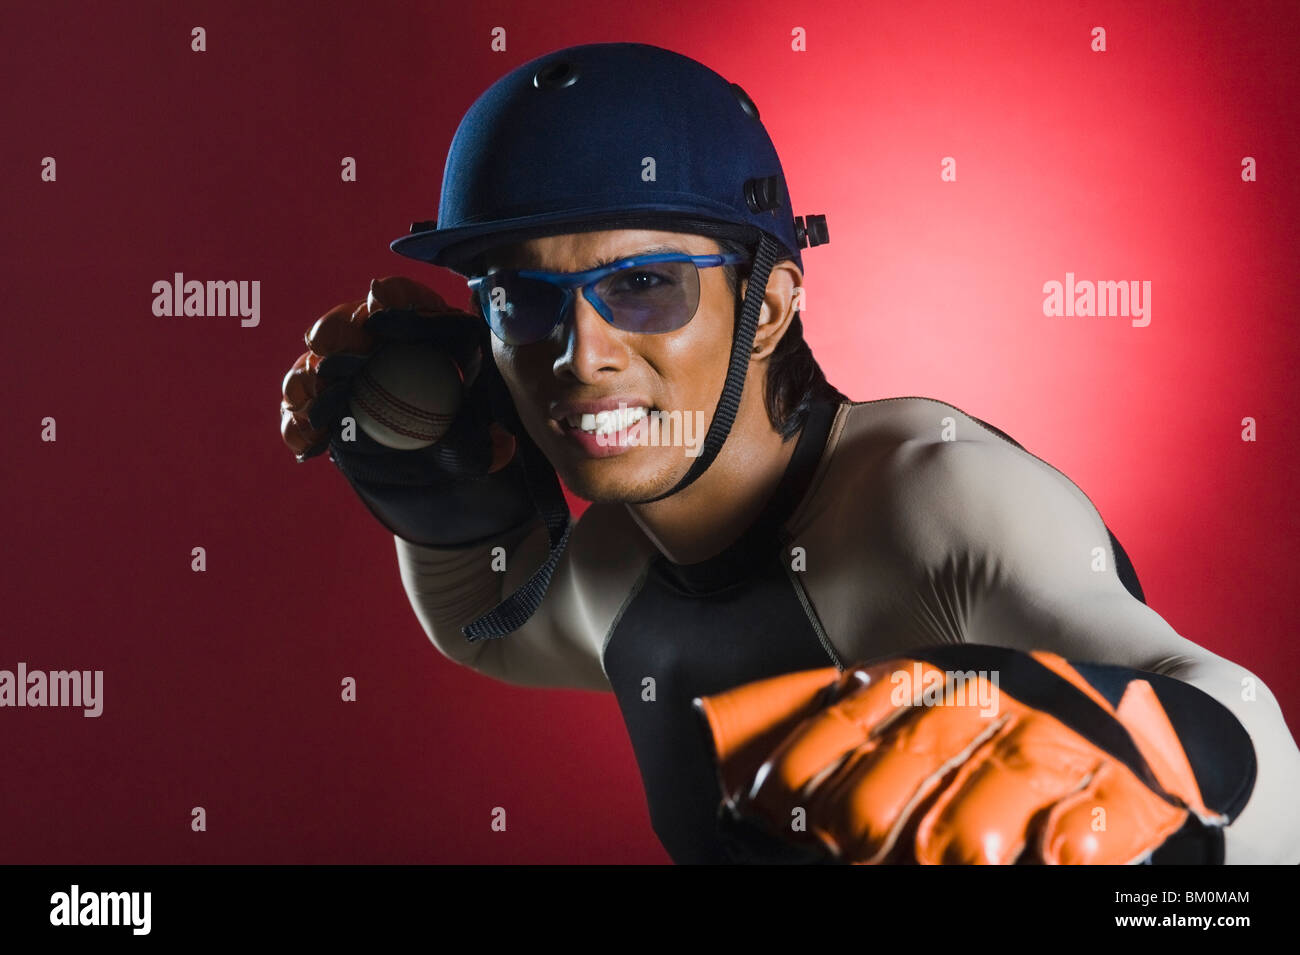 Wicket keeper throwing a cricket ball Stock Photo